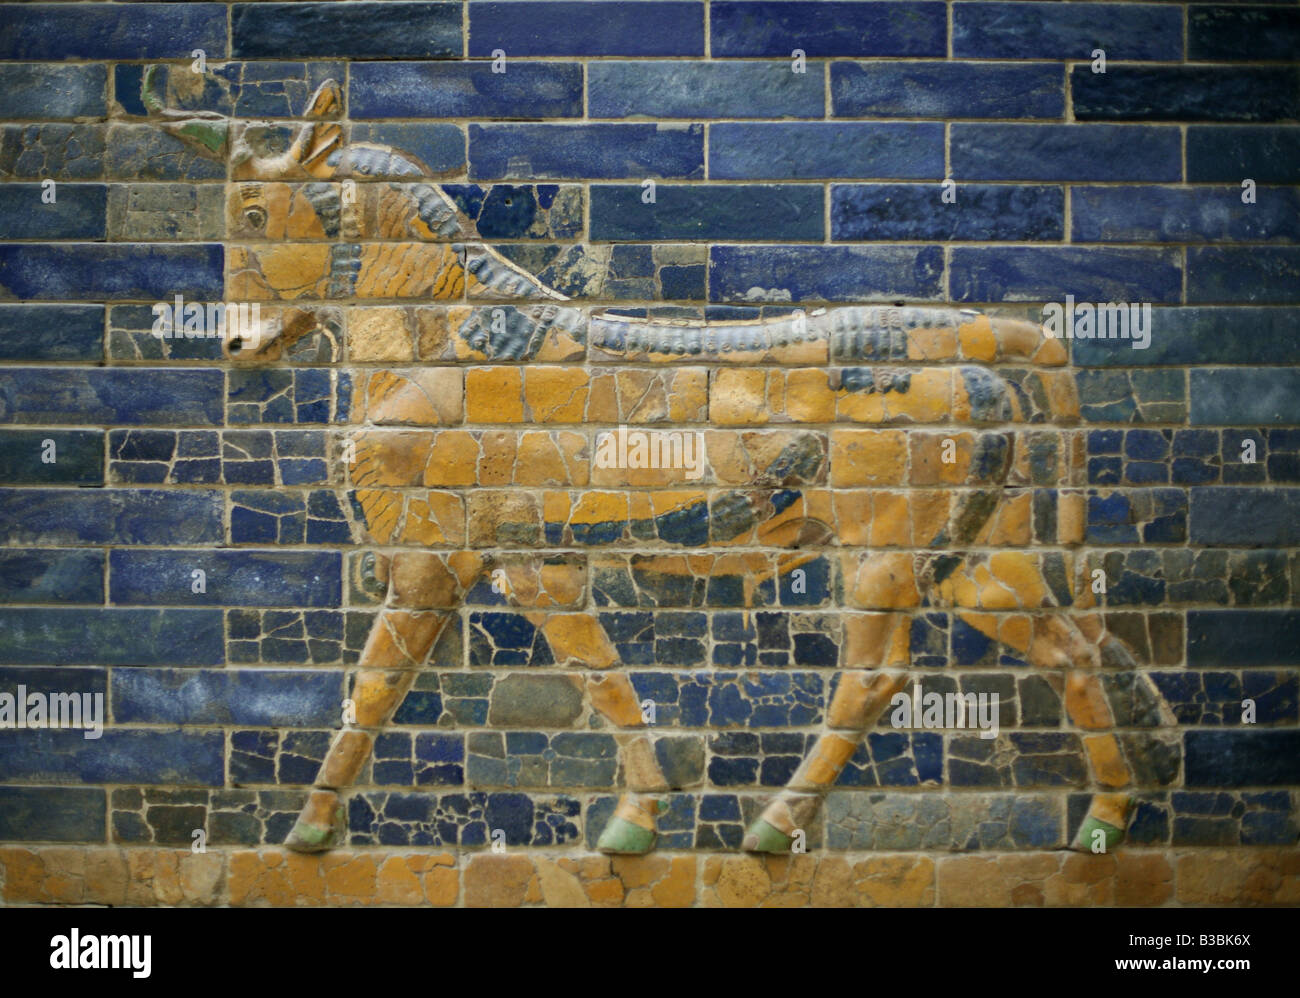 Glazed tiles with an aurochs from The Ishtar Gate in the Pergamon Museum in Berlin, Germany Stock Photo